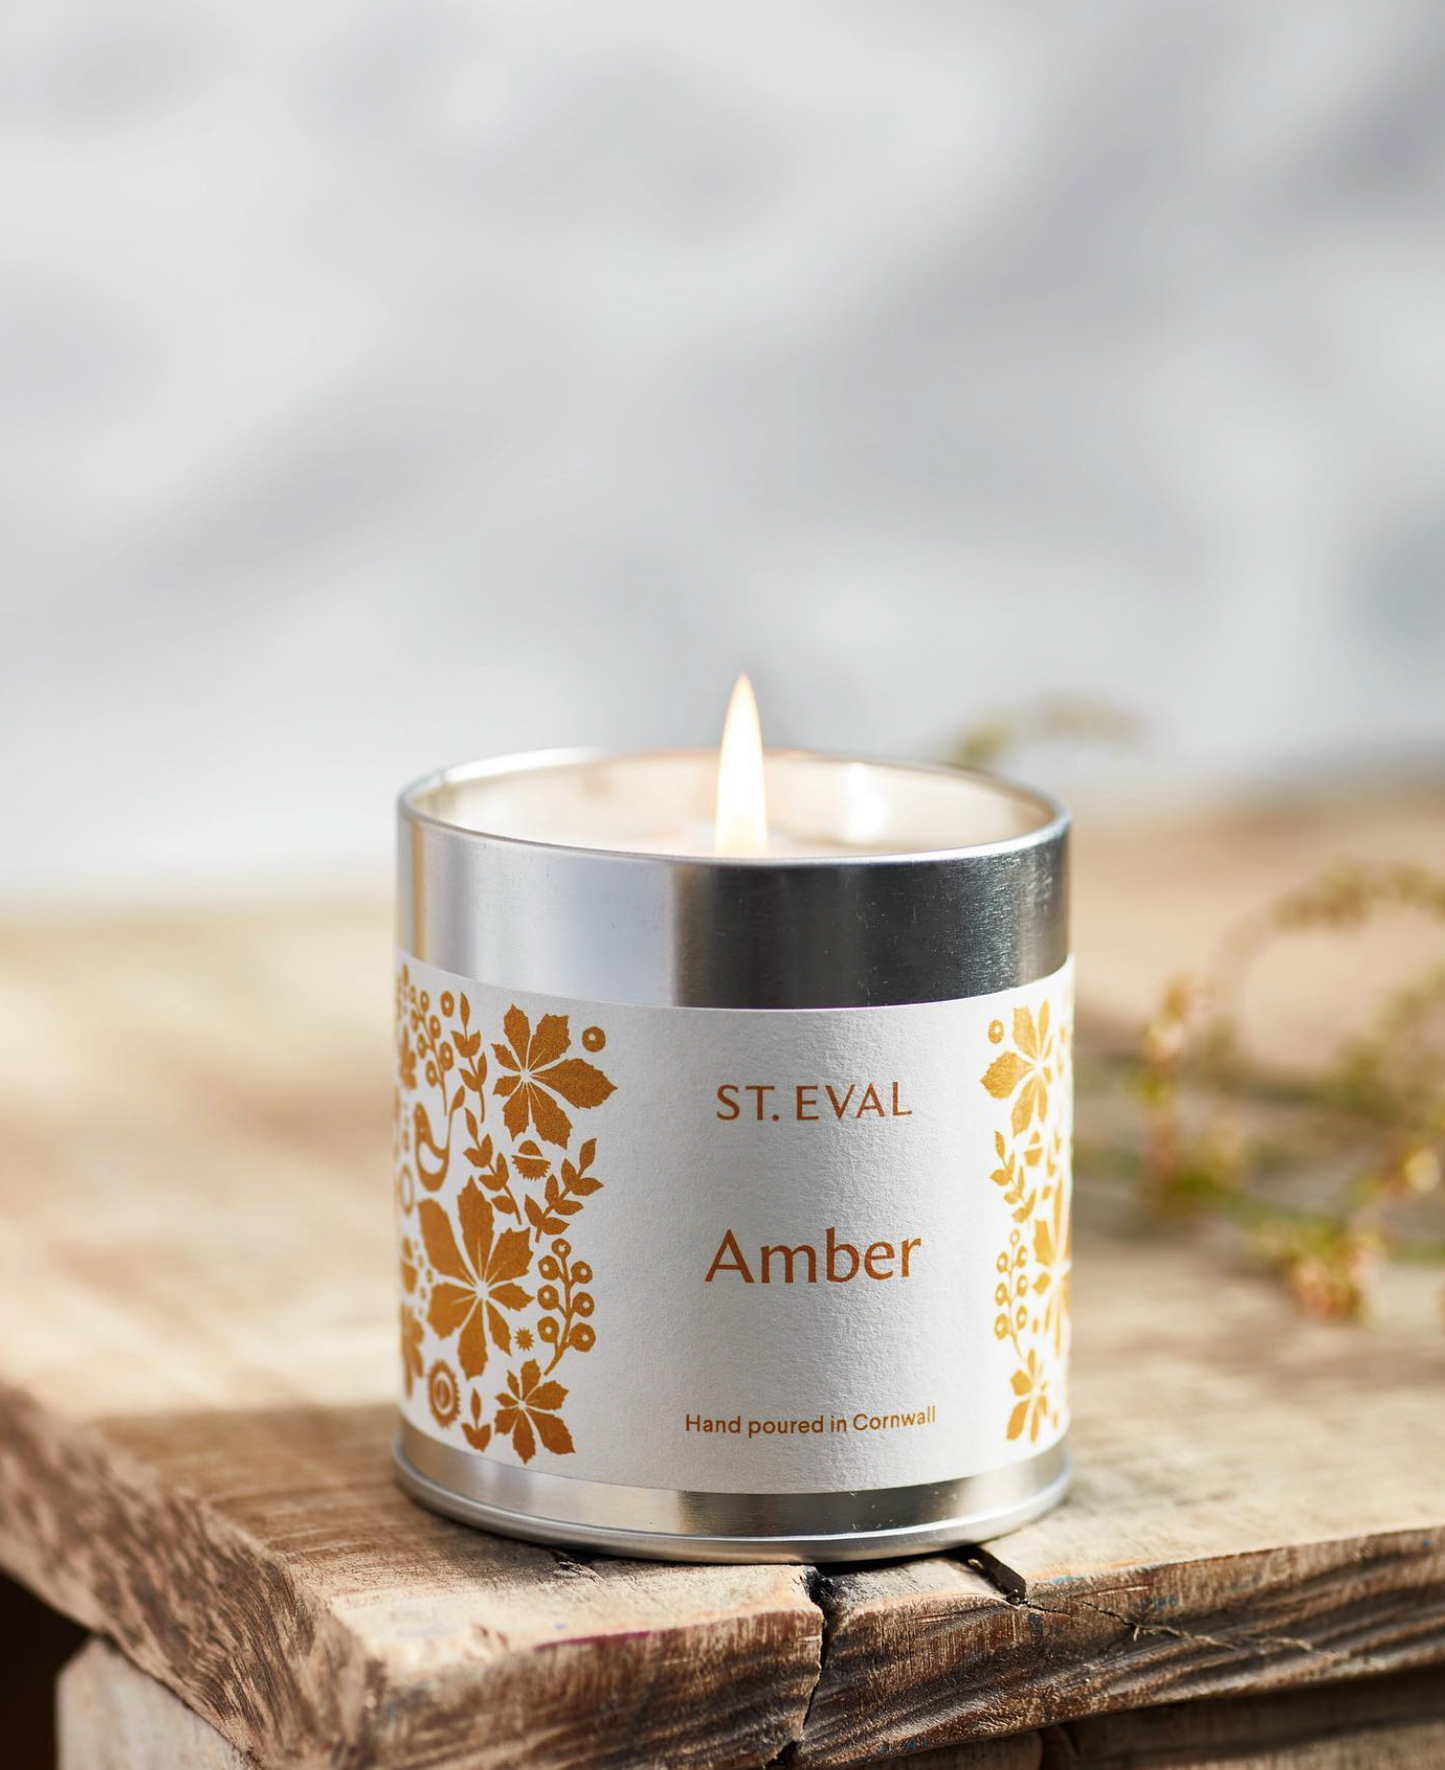 St Eval Amber Scented Tin Candle